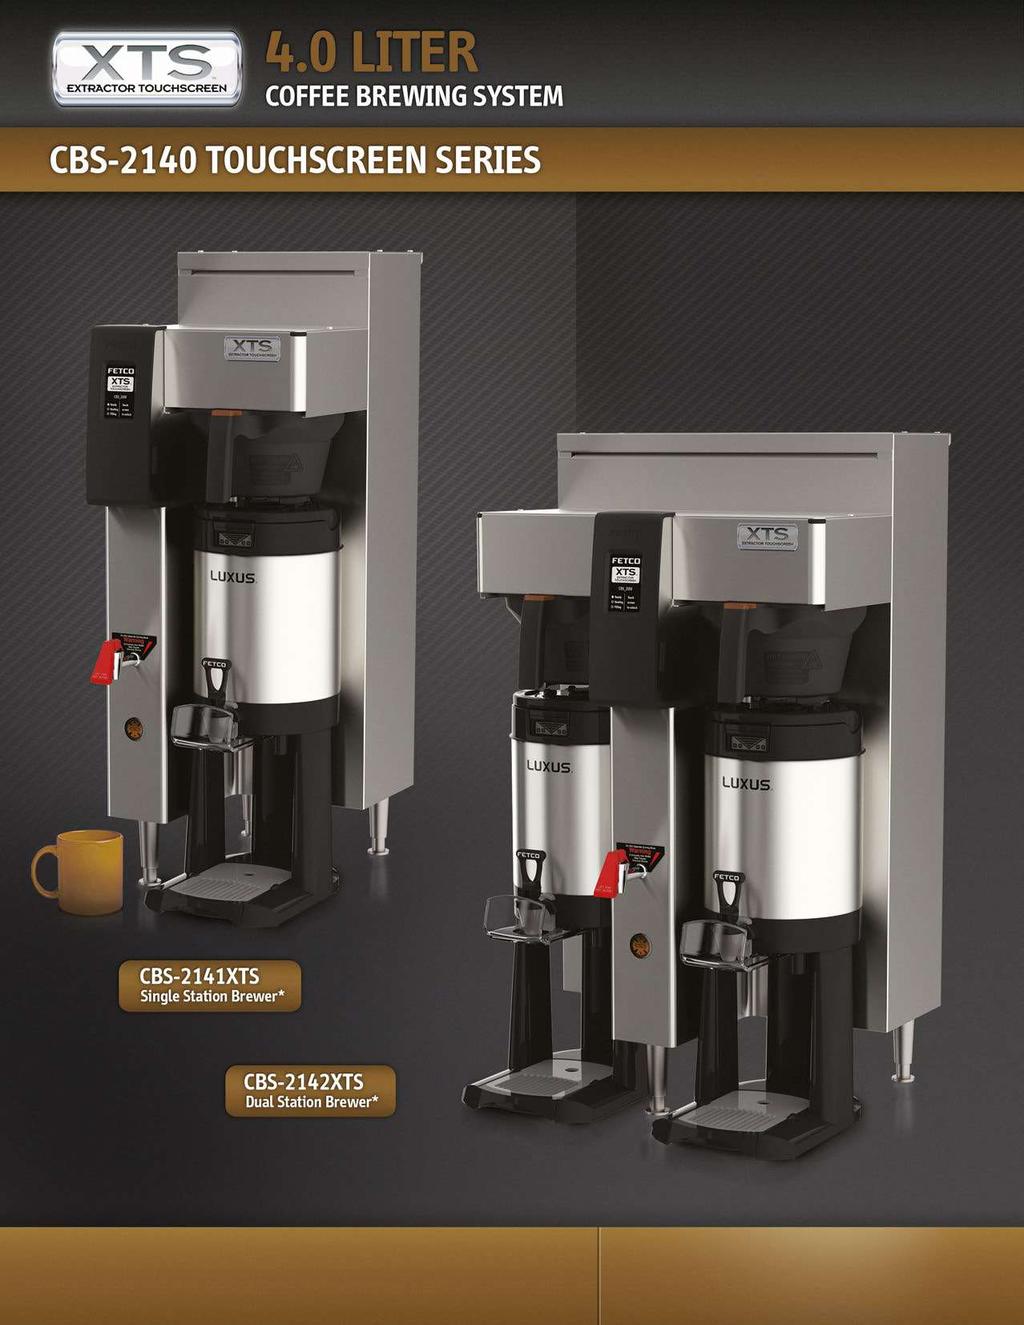 The.0 allon CBS-24 / 242 XTS Touchscreen Series Coffee Brewers provide flexibility in small-to-medium sized venues such as Convenience Stores, Bakery Cafés and Lobbies.